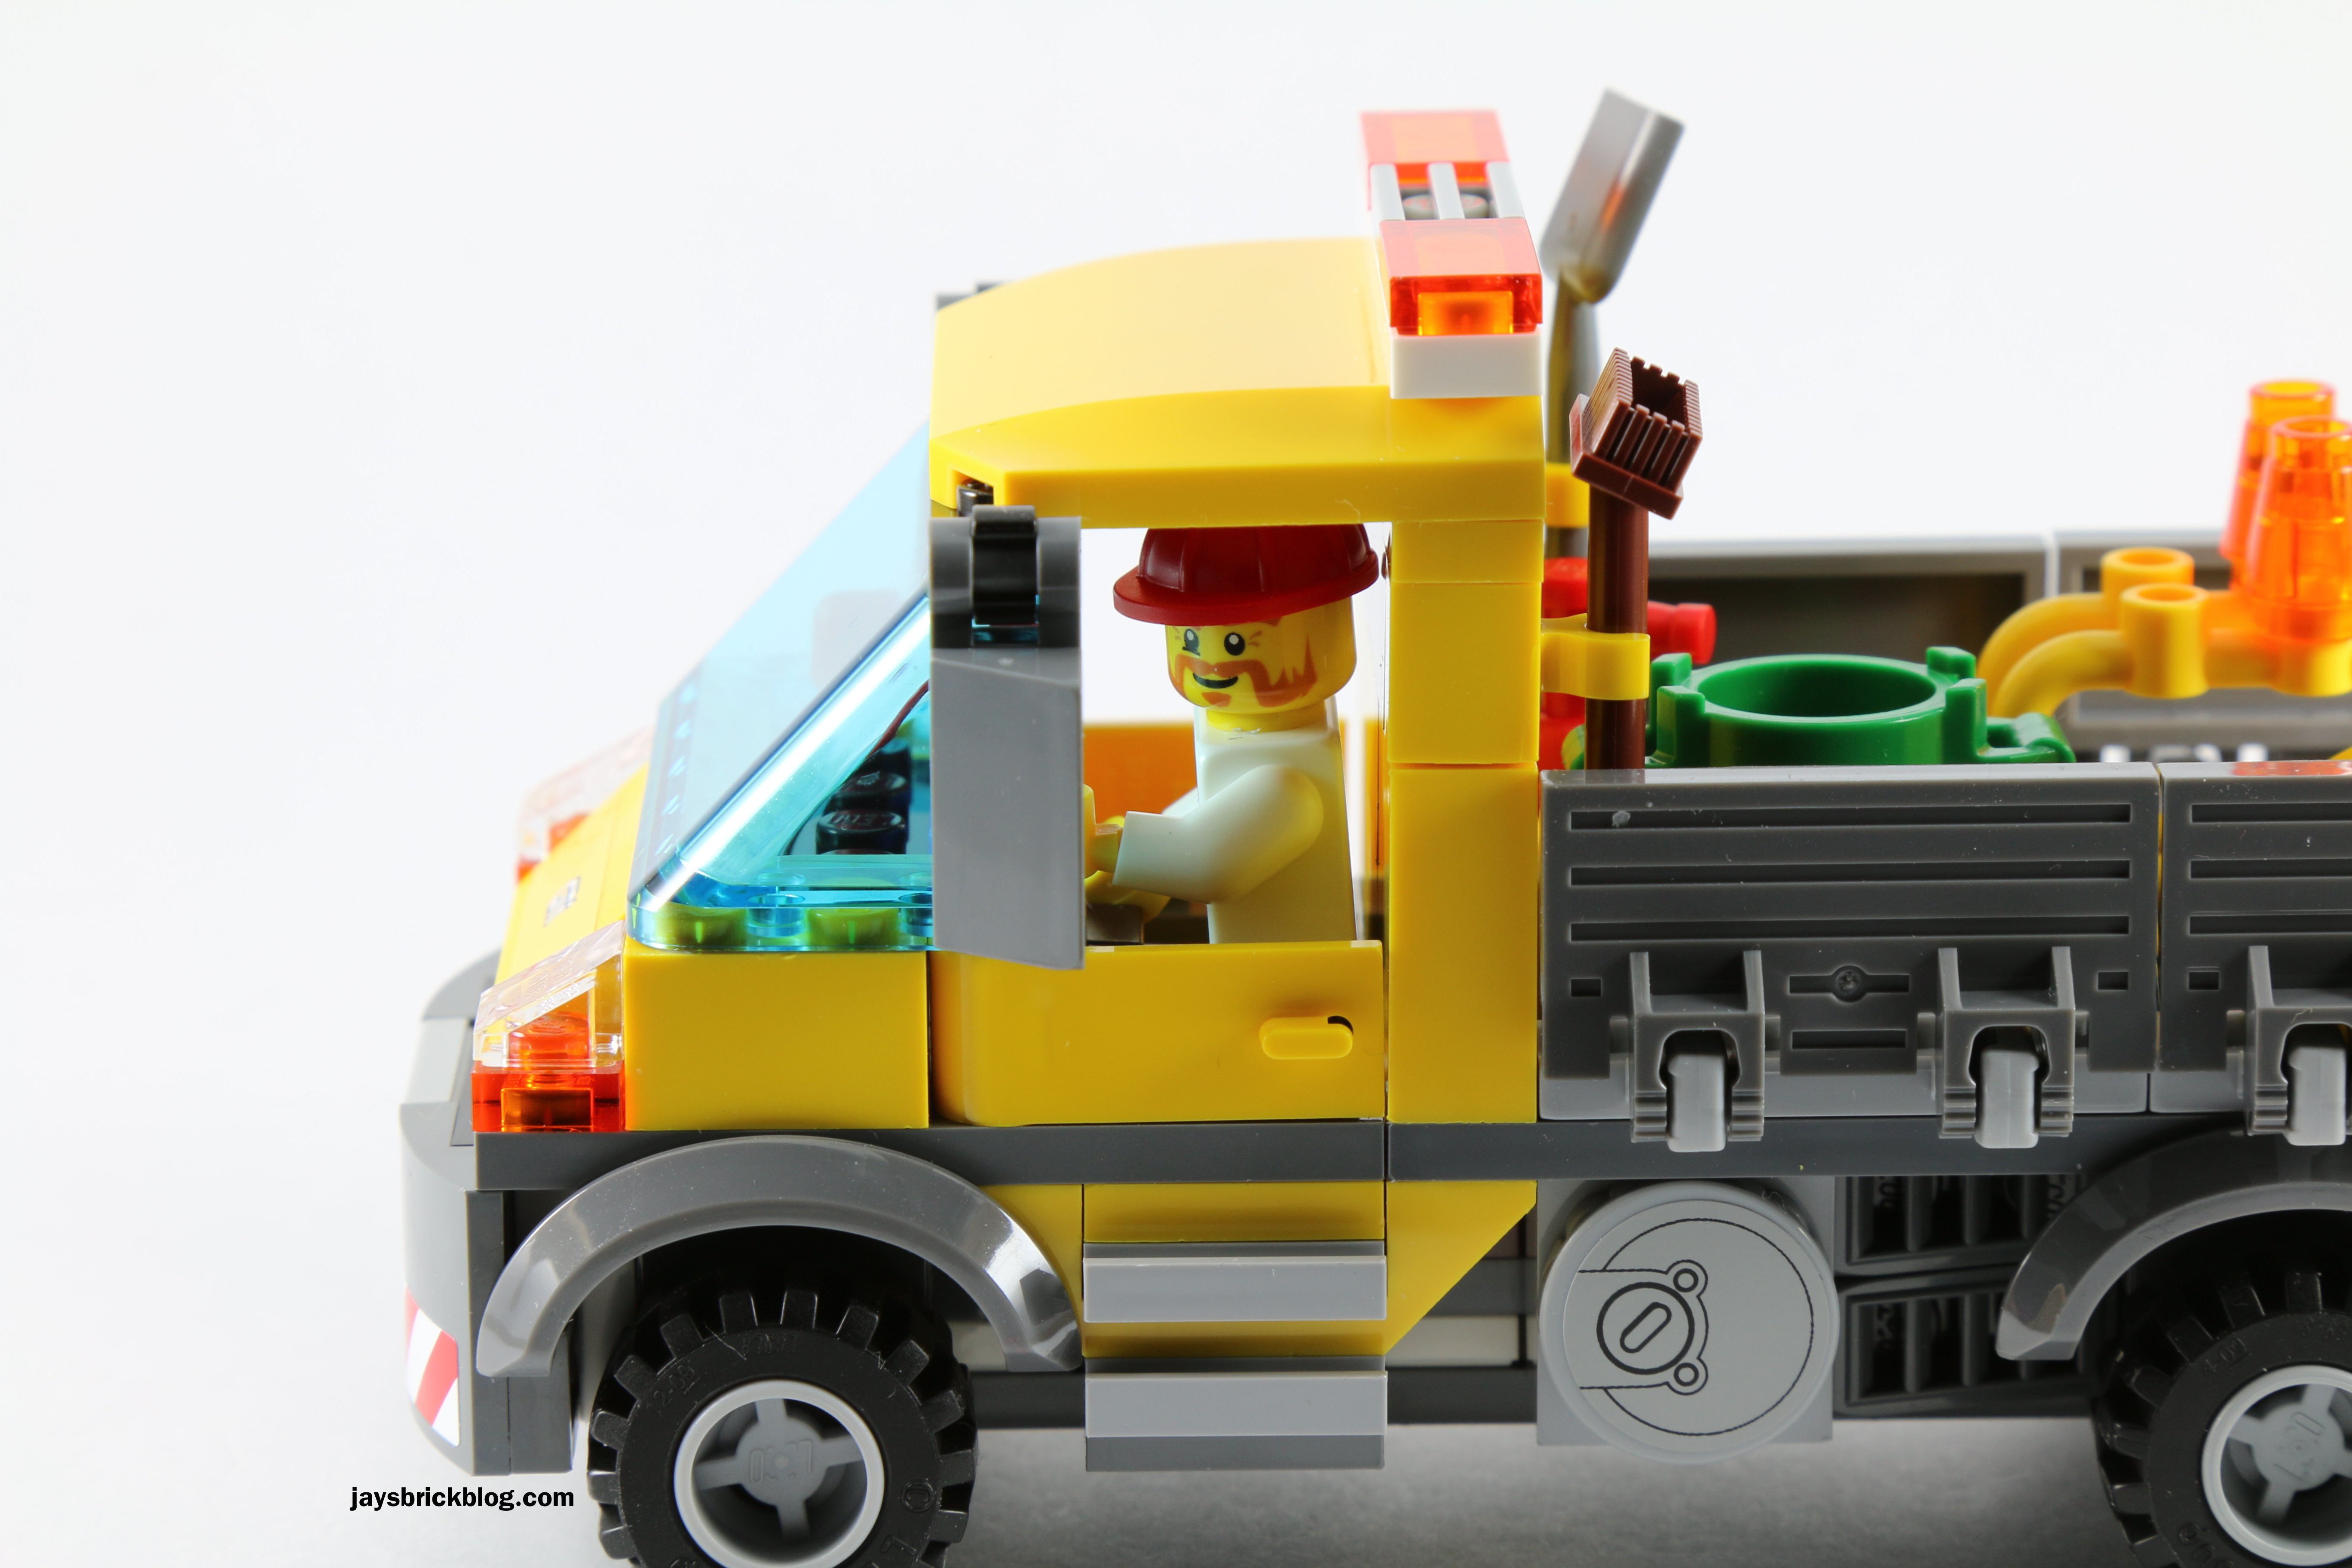 Review: LEGO City 60073 - Service Truck